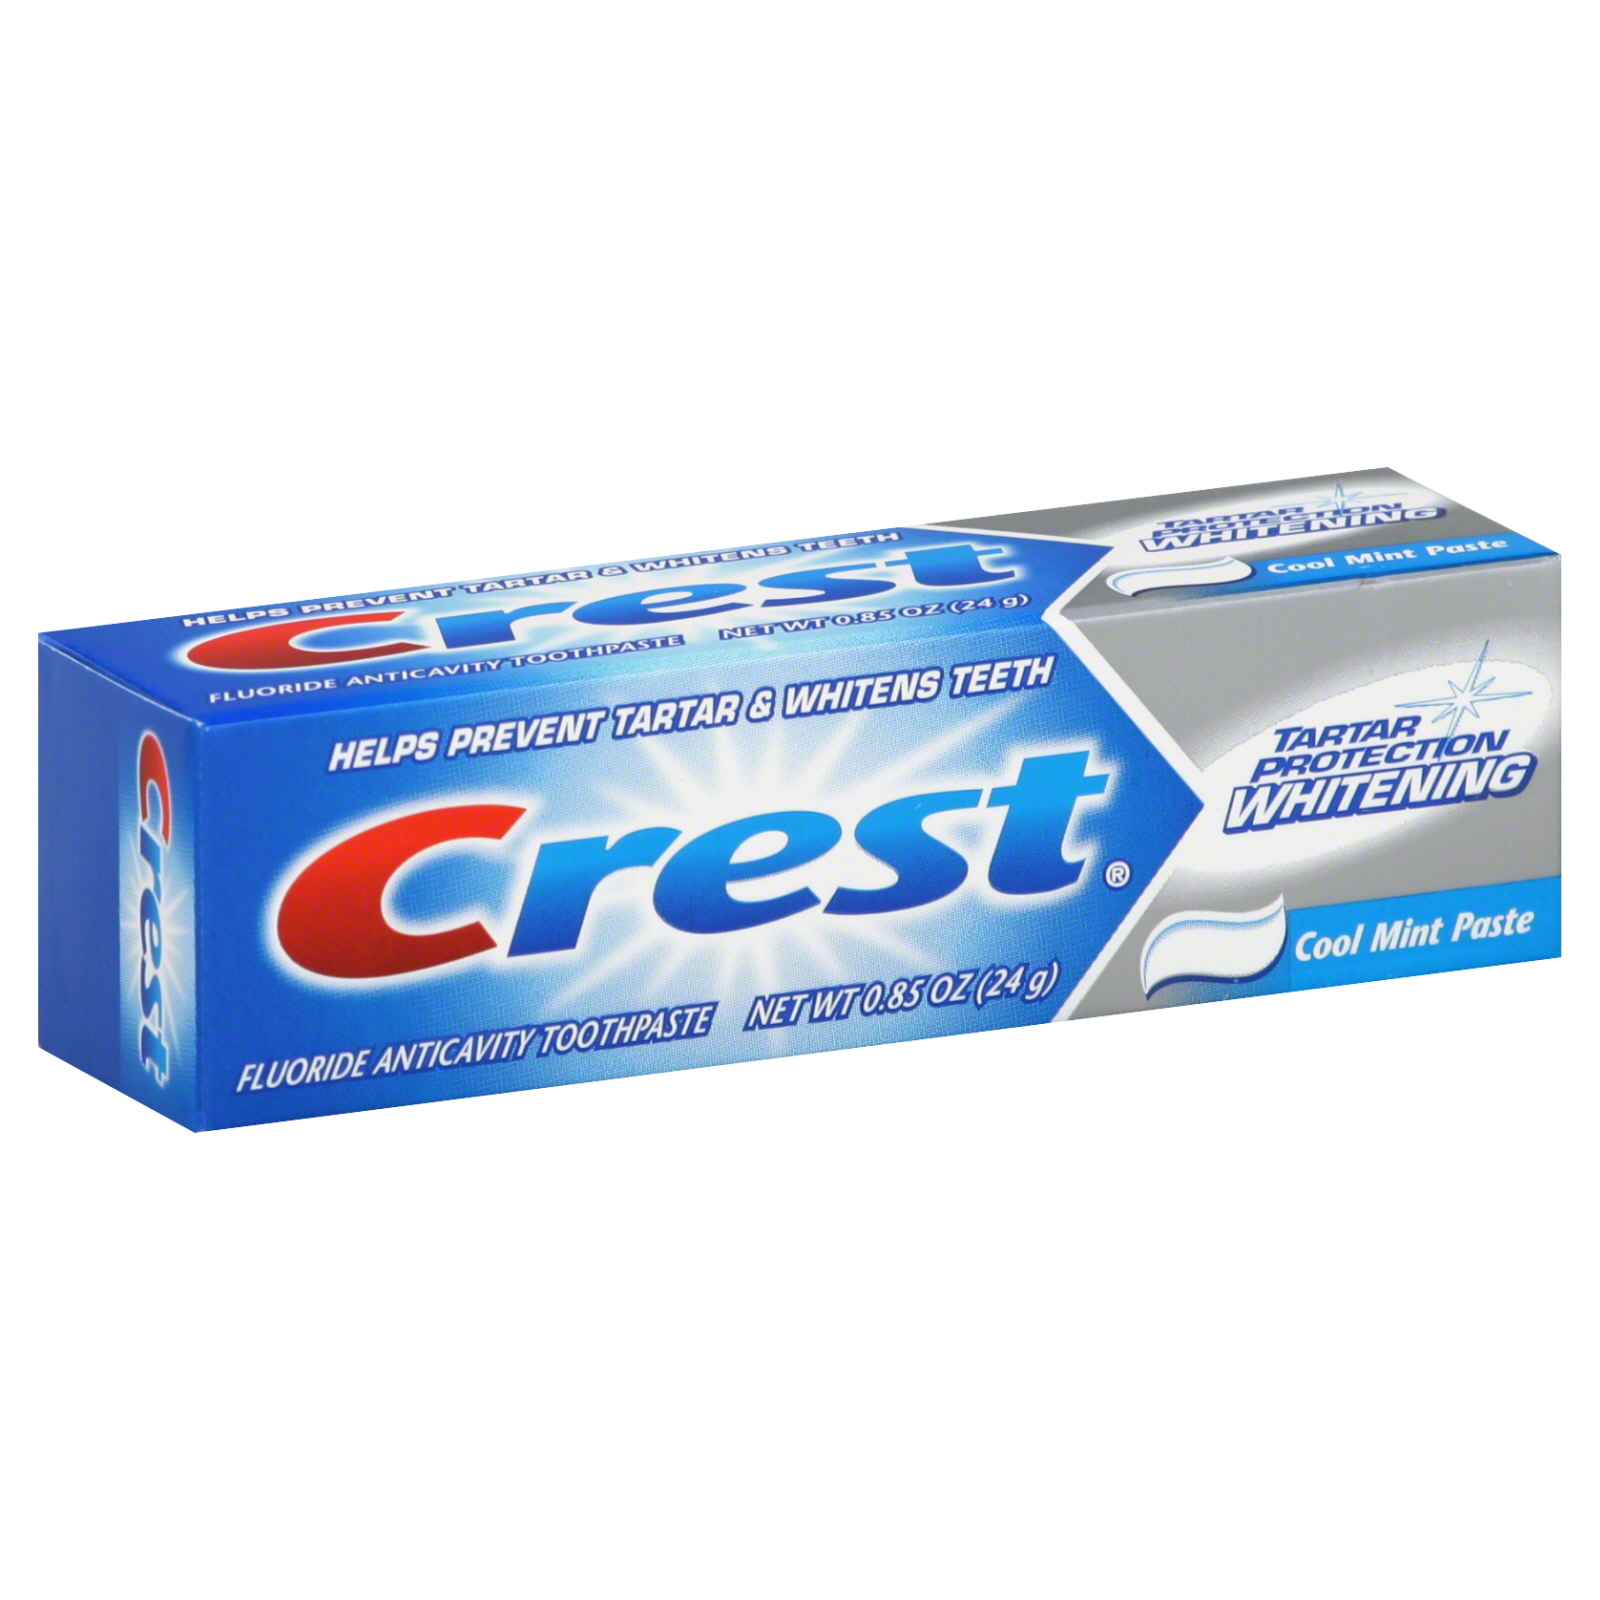 Crest Tartar Protection Whitening Fluoride Anticavity Toothpaste, Cool Mint Paste, 0.85 oz (24 g)